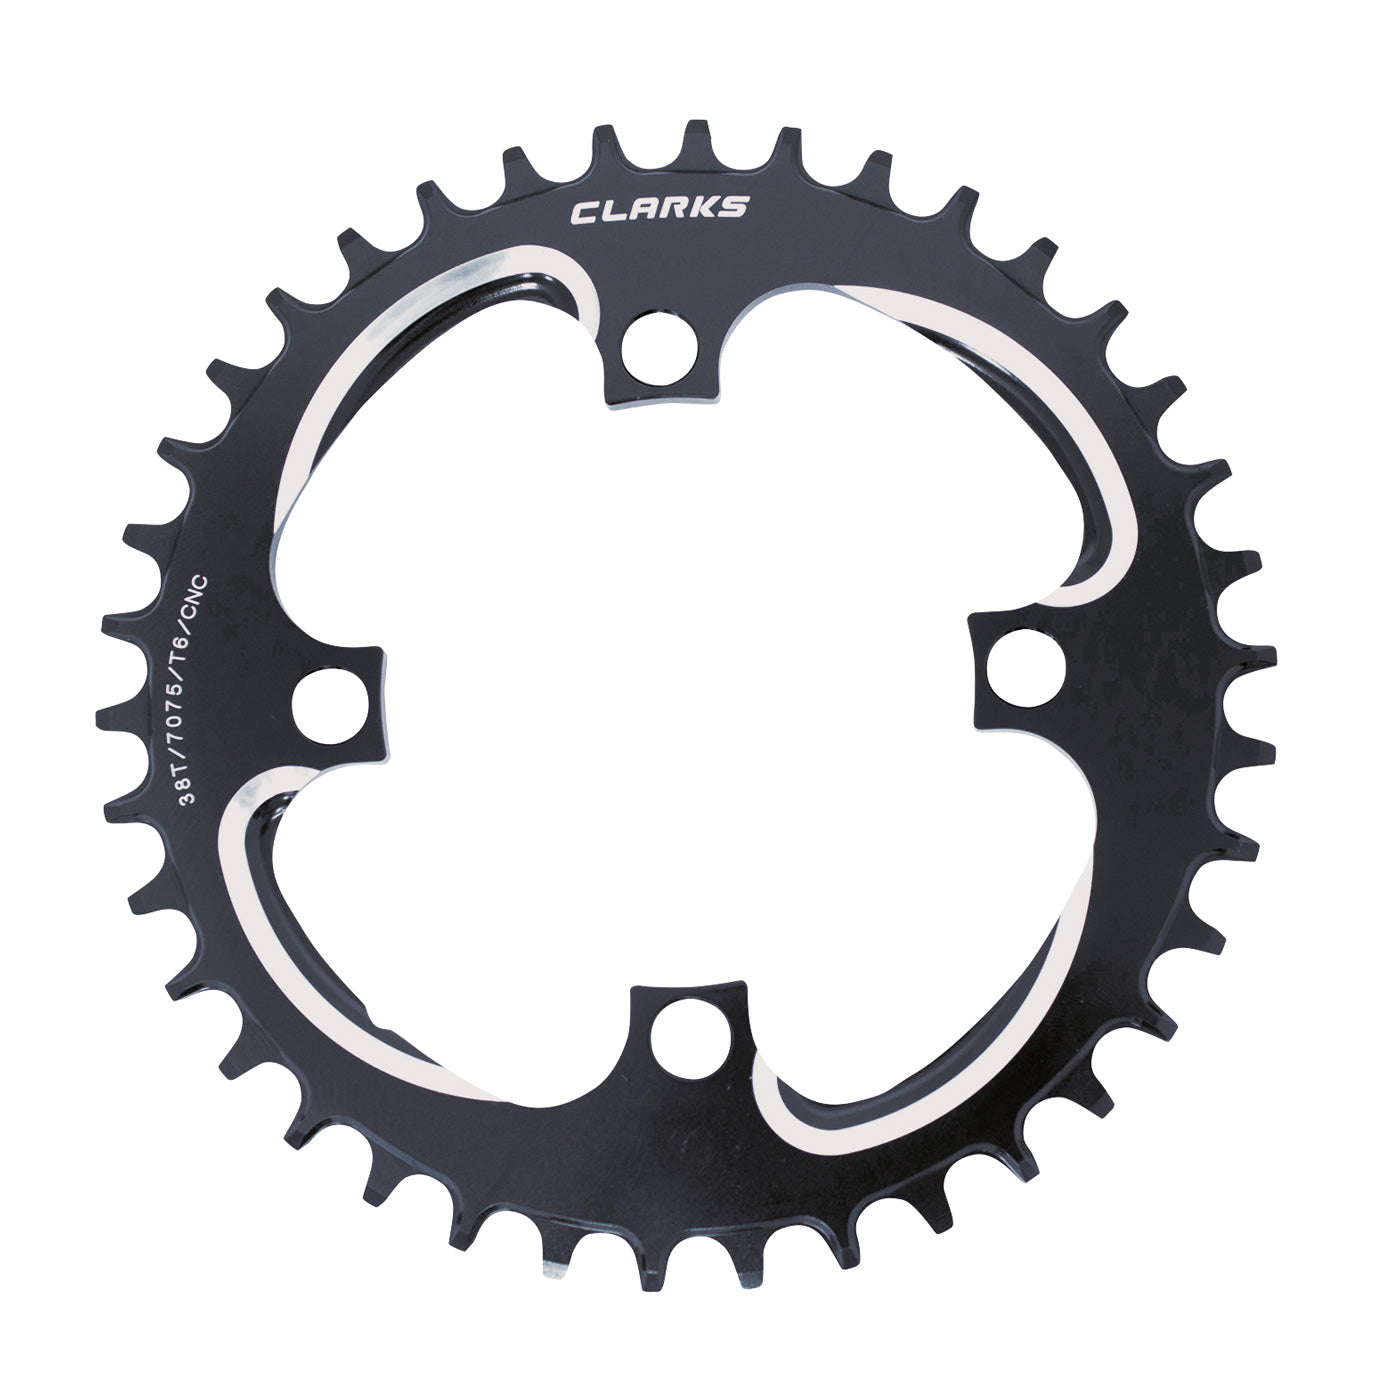 View 4 Bolt Alloy chainring 94BCD 32t information